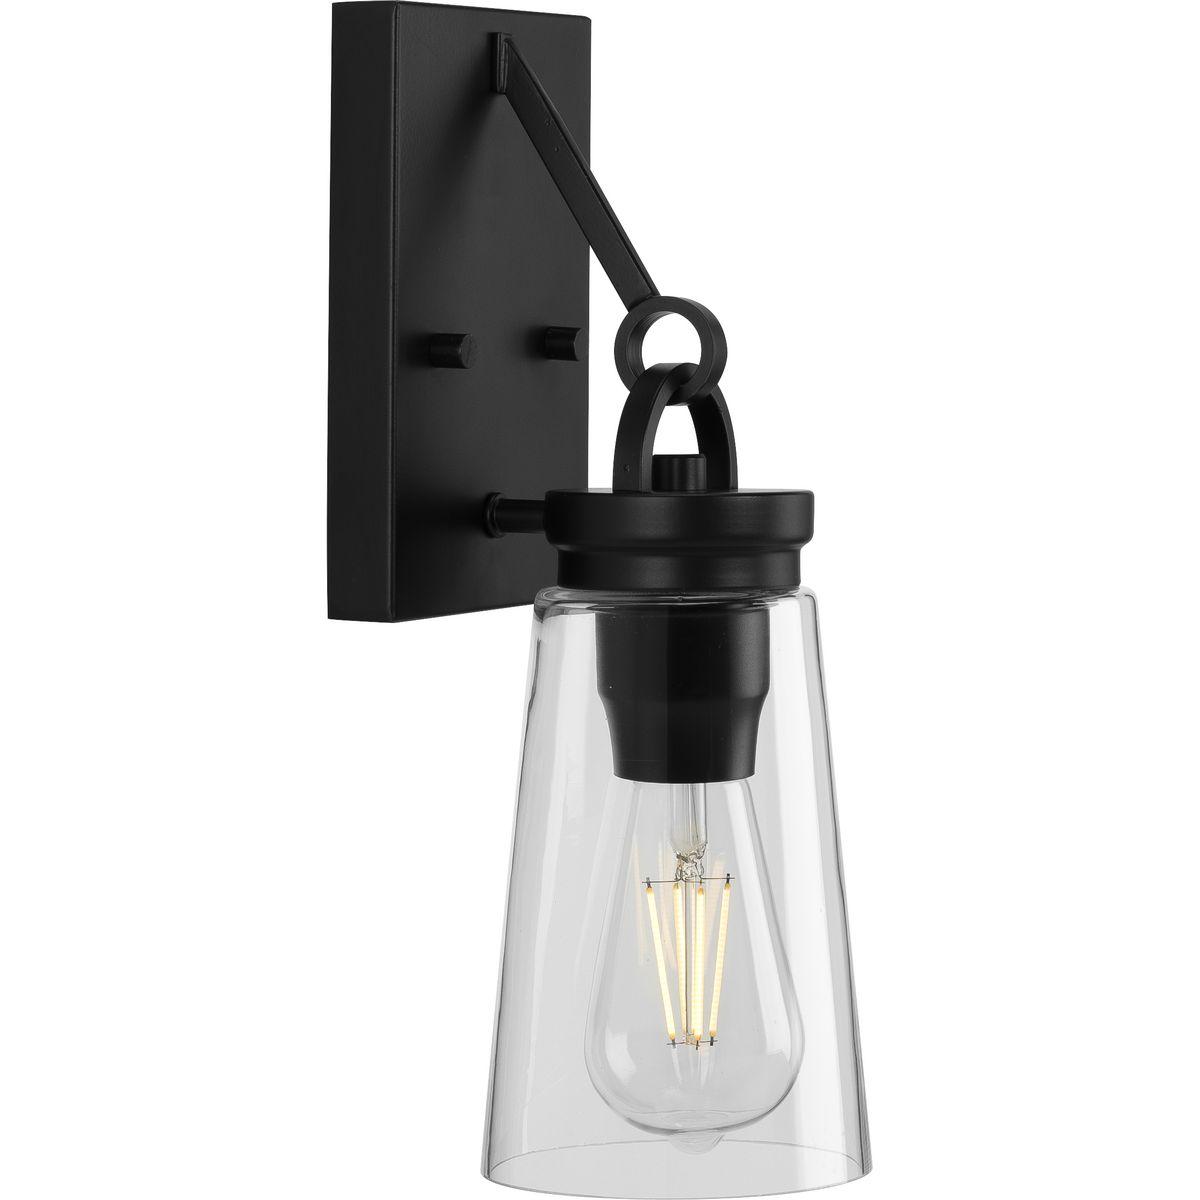 Hubbell P710097-031 Inspired by traditional post-and-beam construction, the Stockbrace Collection 1-Light Matte Black Clear Glass Farmhouse Wall Light. Clean lines, an open design, and architectural details are coated in a classic matte black finish. A light source illuminat